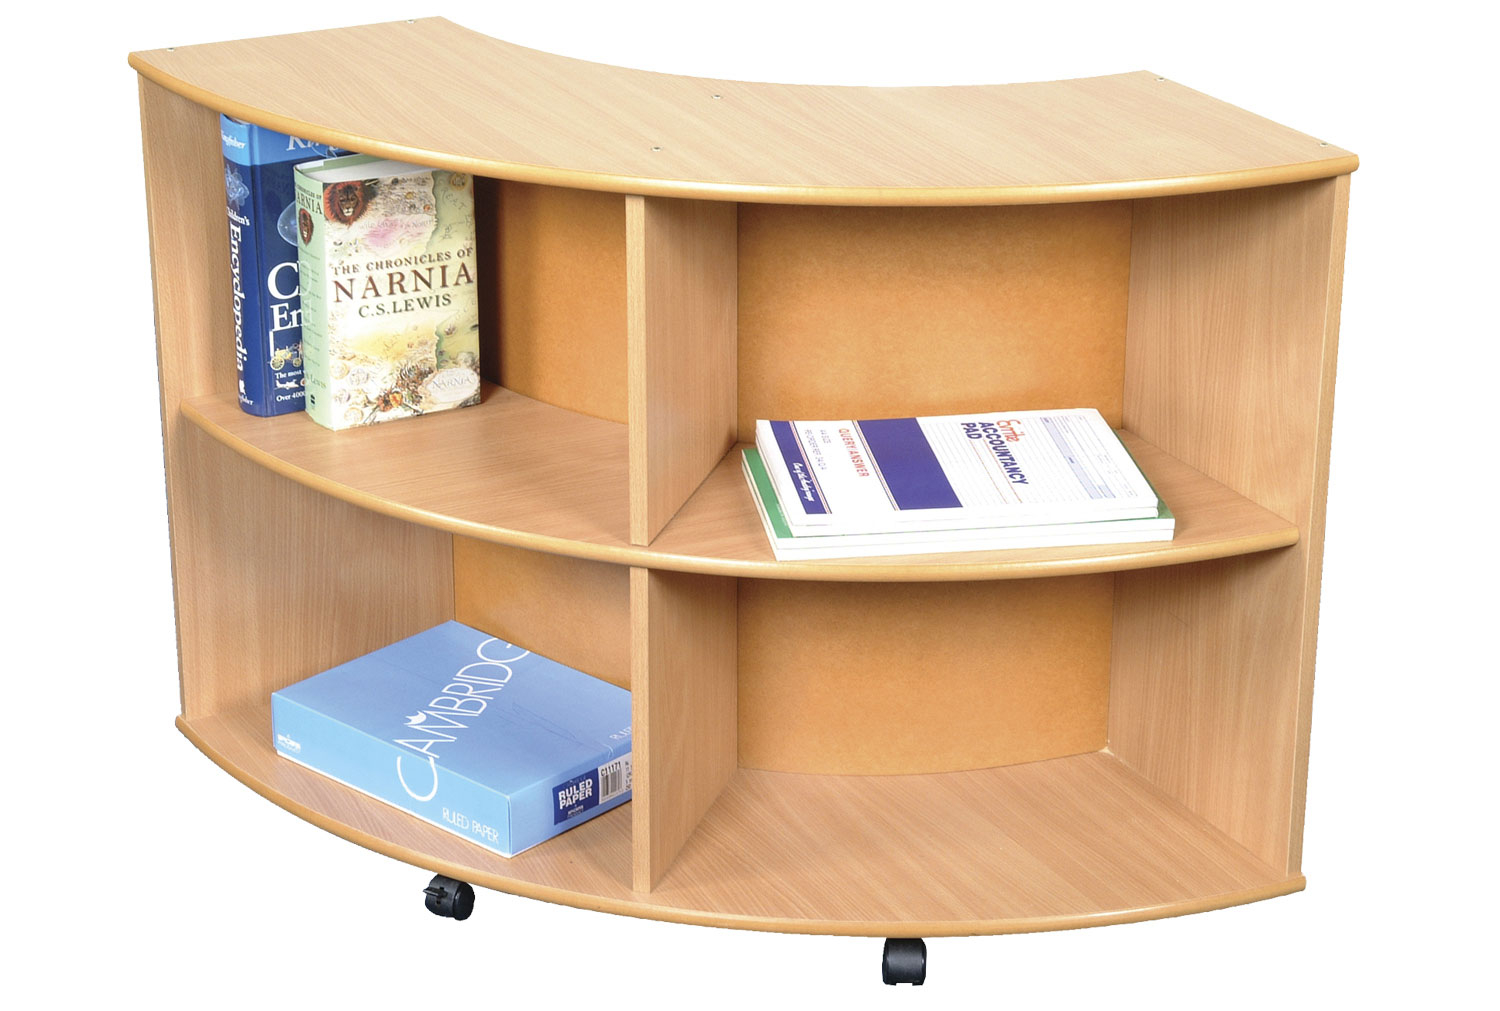 Early Years Mobile Curve In Book Storage Unit, Beech